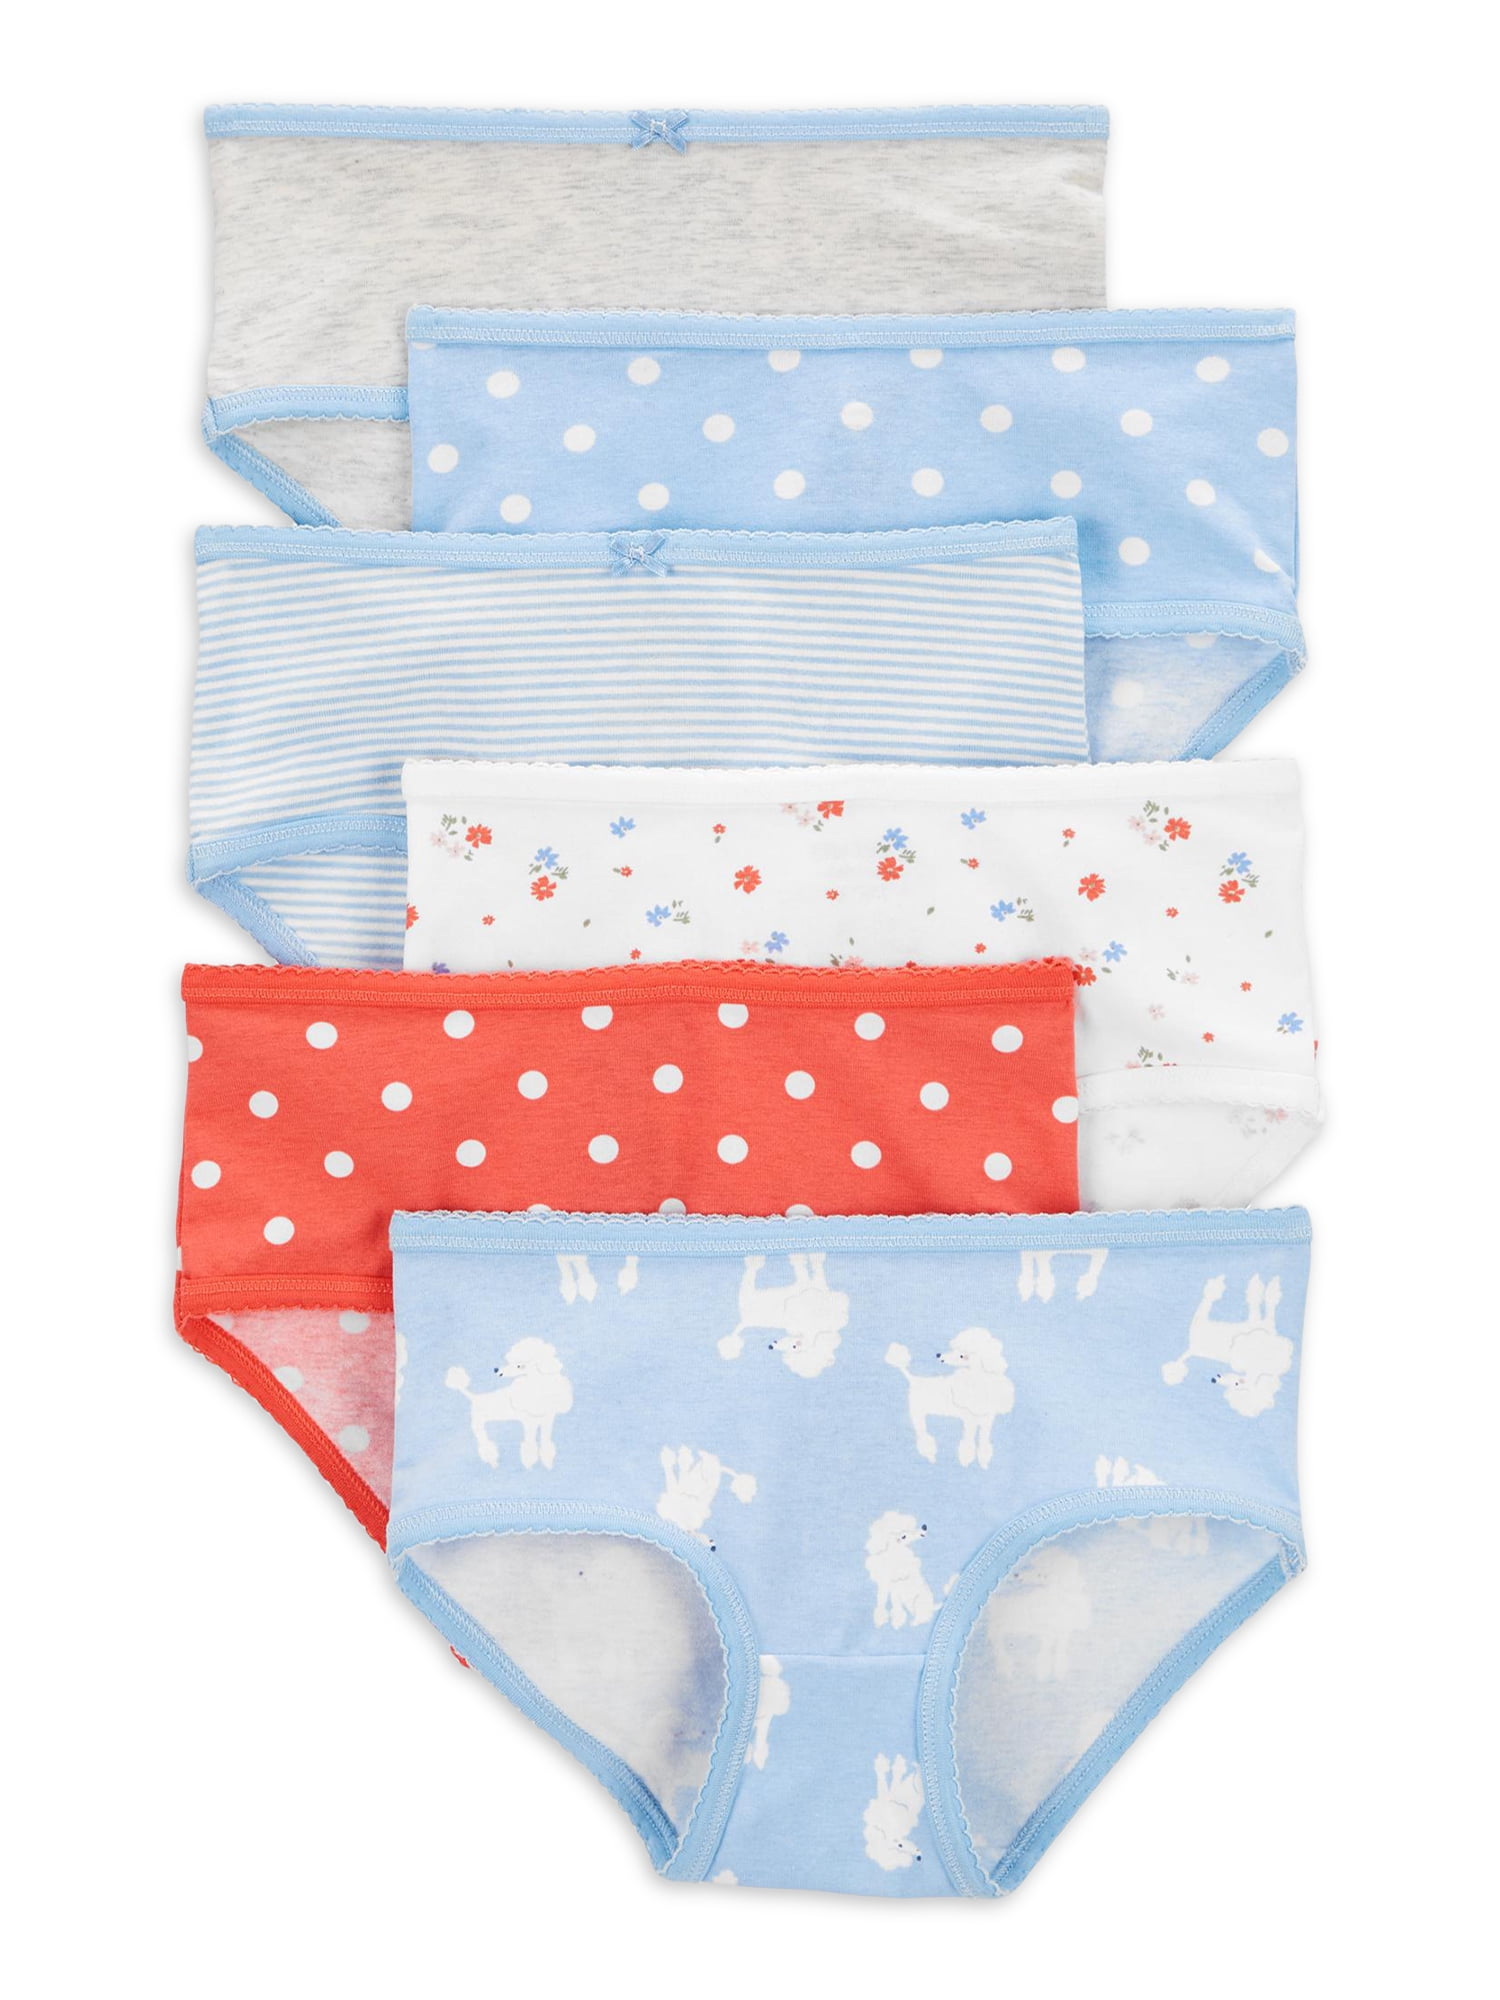 Carter's Child of Mine Toddler Girl Floral Brief Underwear, 6-Pack, Sizes 4T-5T  